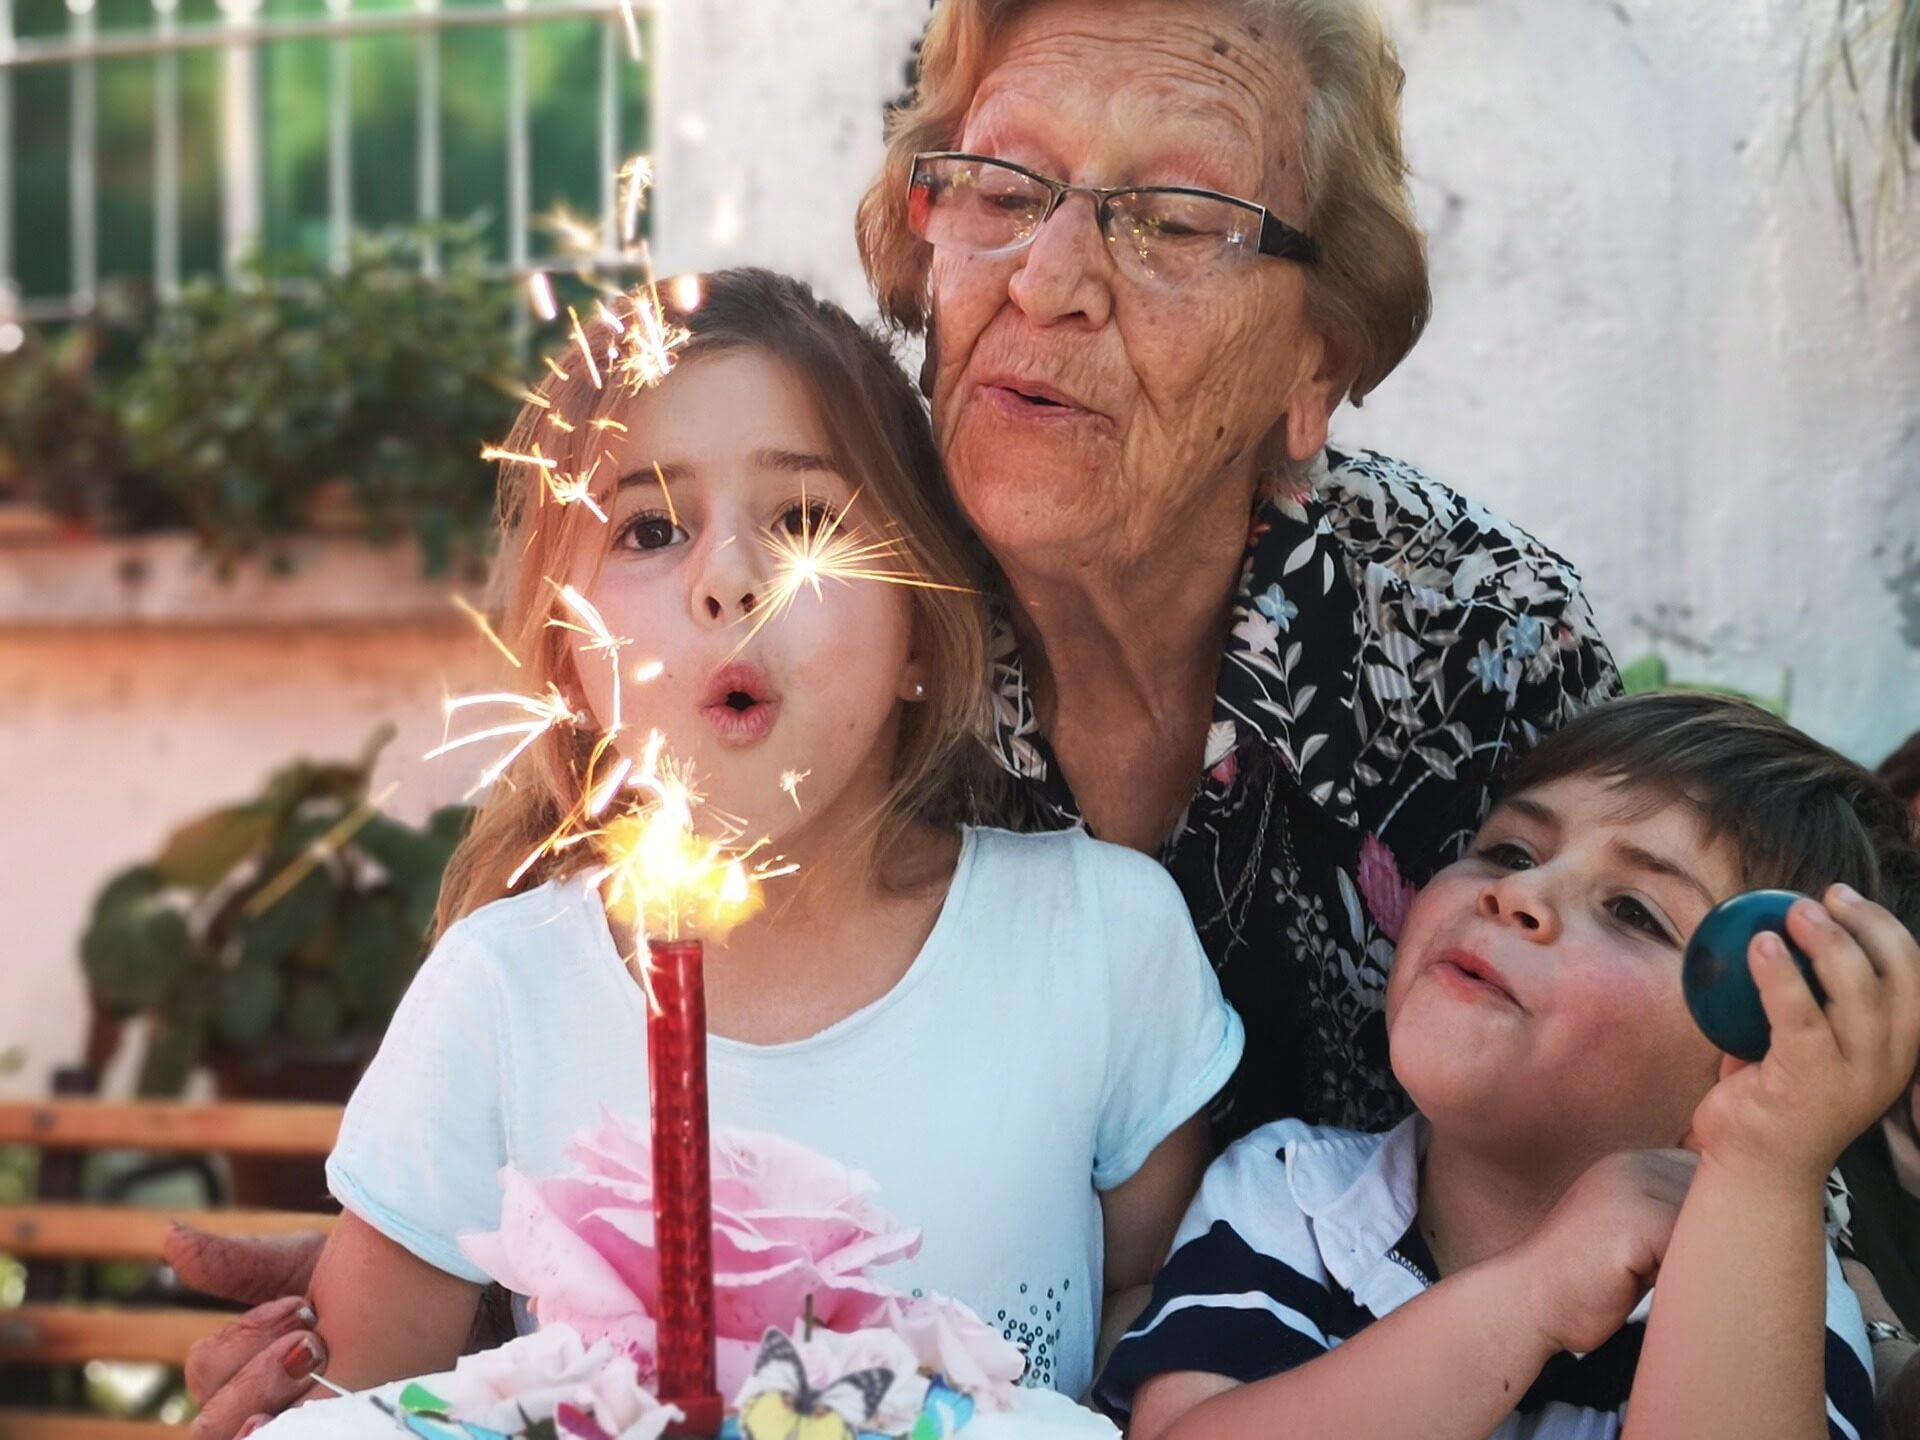 Image: Grandmother Blowing out candles with her grandchildren--representing how we may be able to inherit trauma across generations